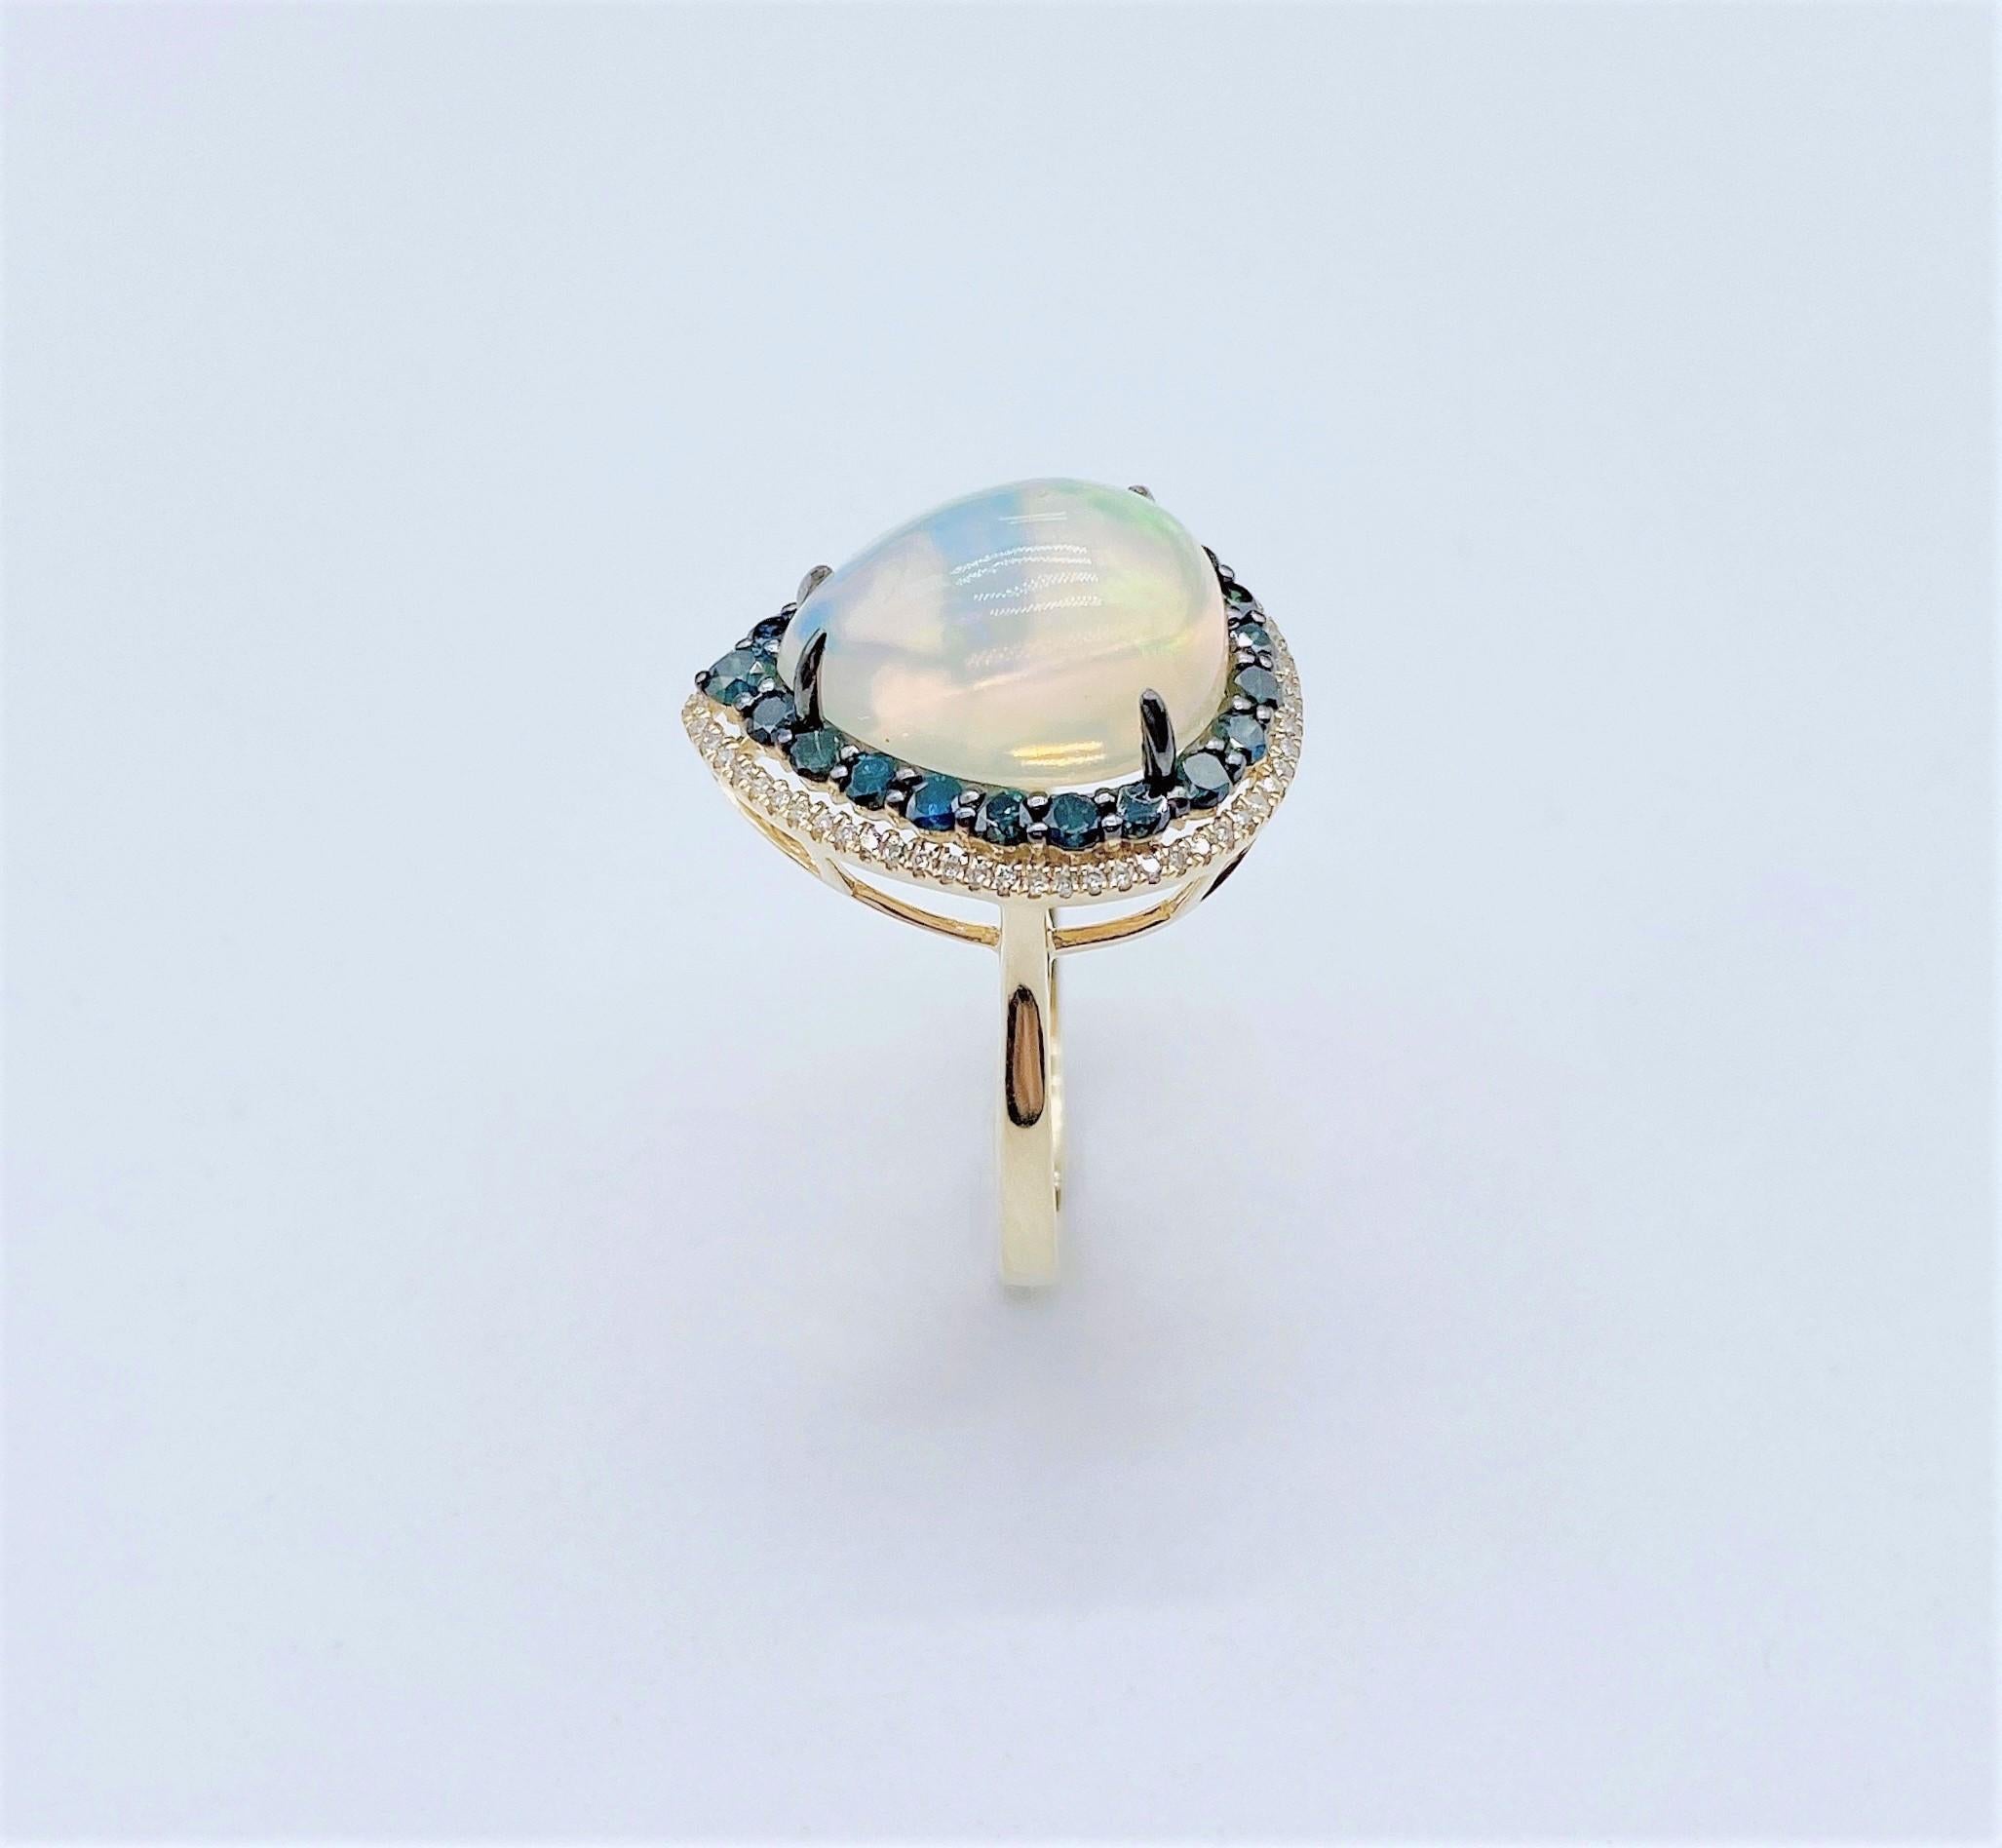 The Following Items we are offering is this Rare Important Radiant 18KT Gold LARGE Glittering and Sparkling Magnificent Fancy Colored Opal and Blue Sapphire White Diamond Ring. Ring Contains a Beautiful Gorgeous Large Opal surrounded with a Halo of